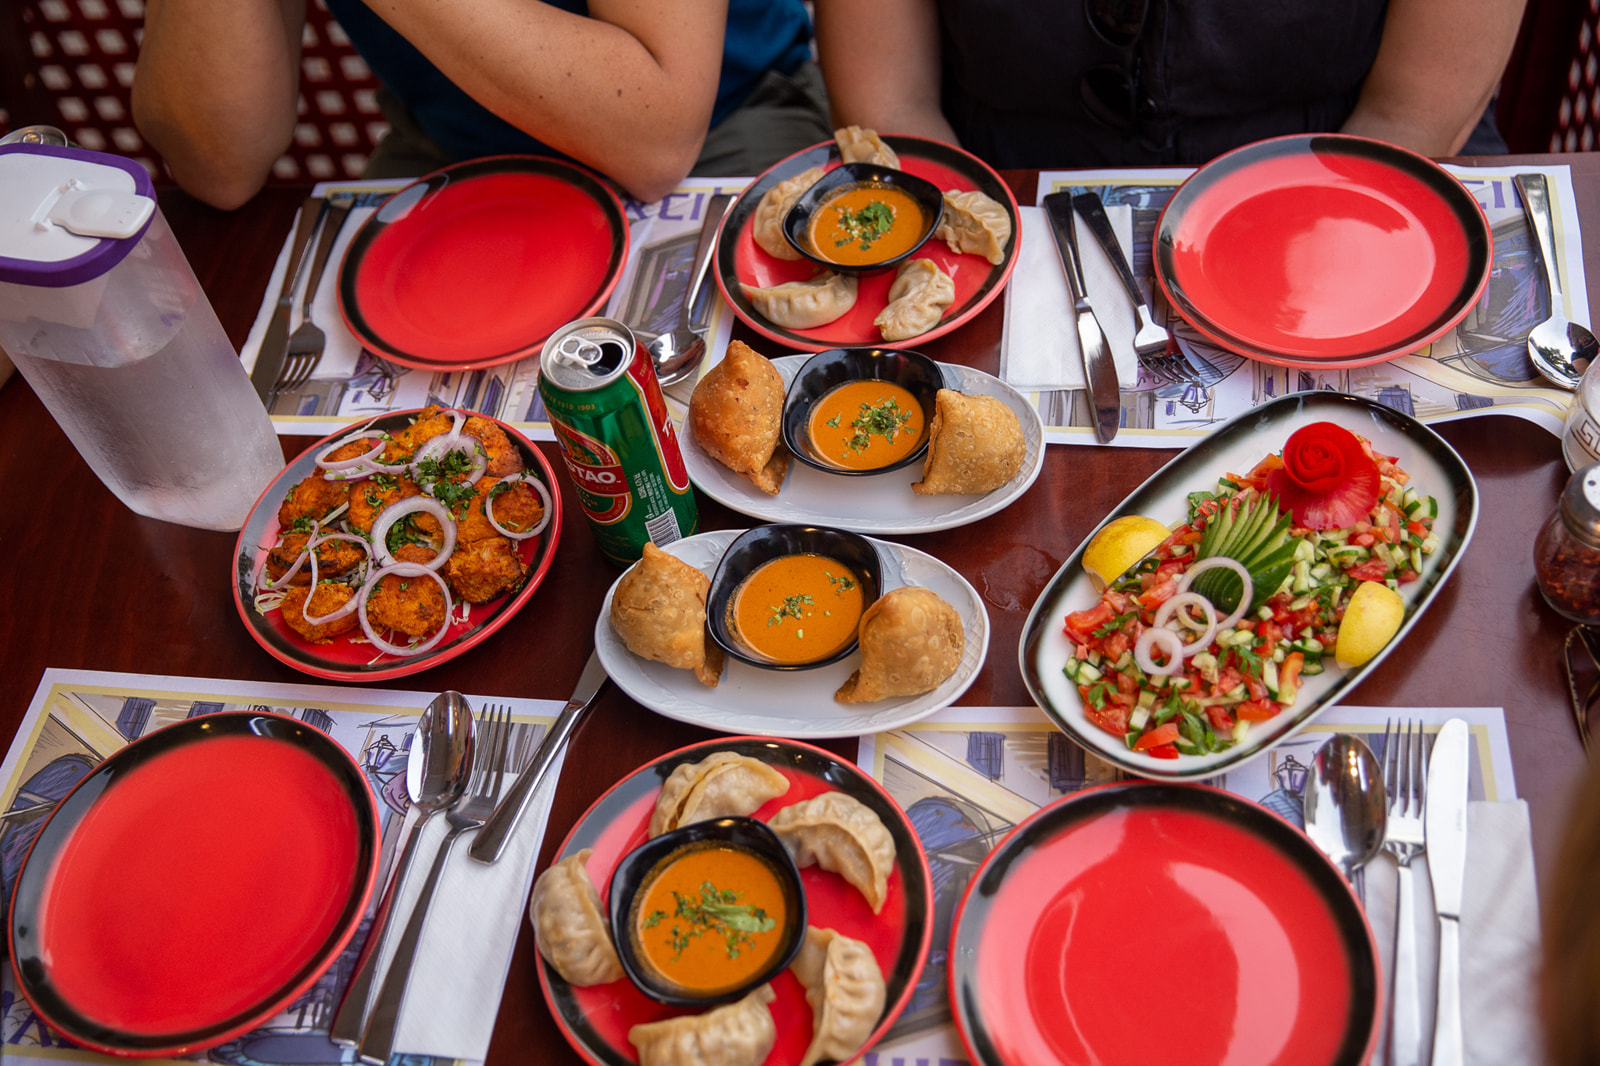 Colorful table with red plates, samosas, dumplings, and salads